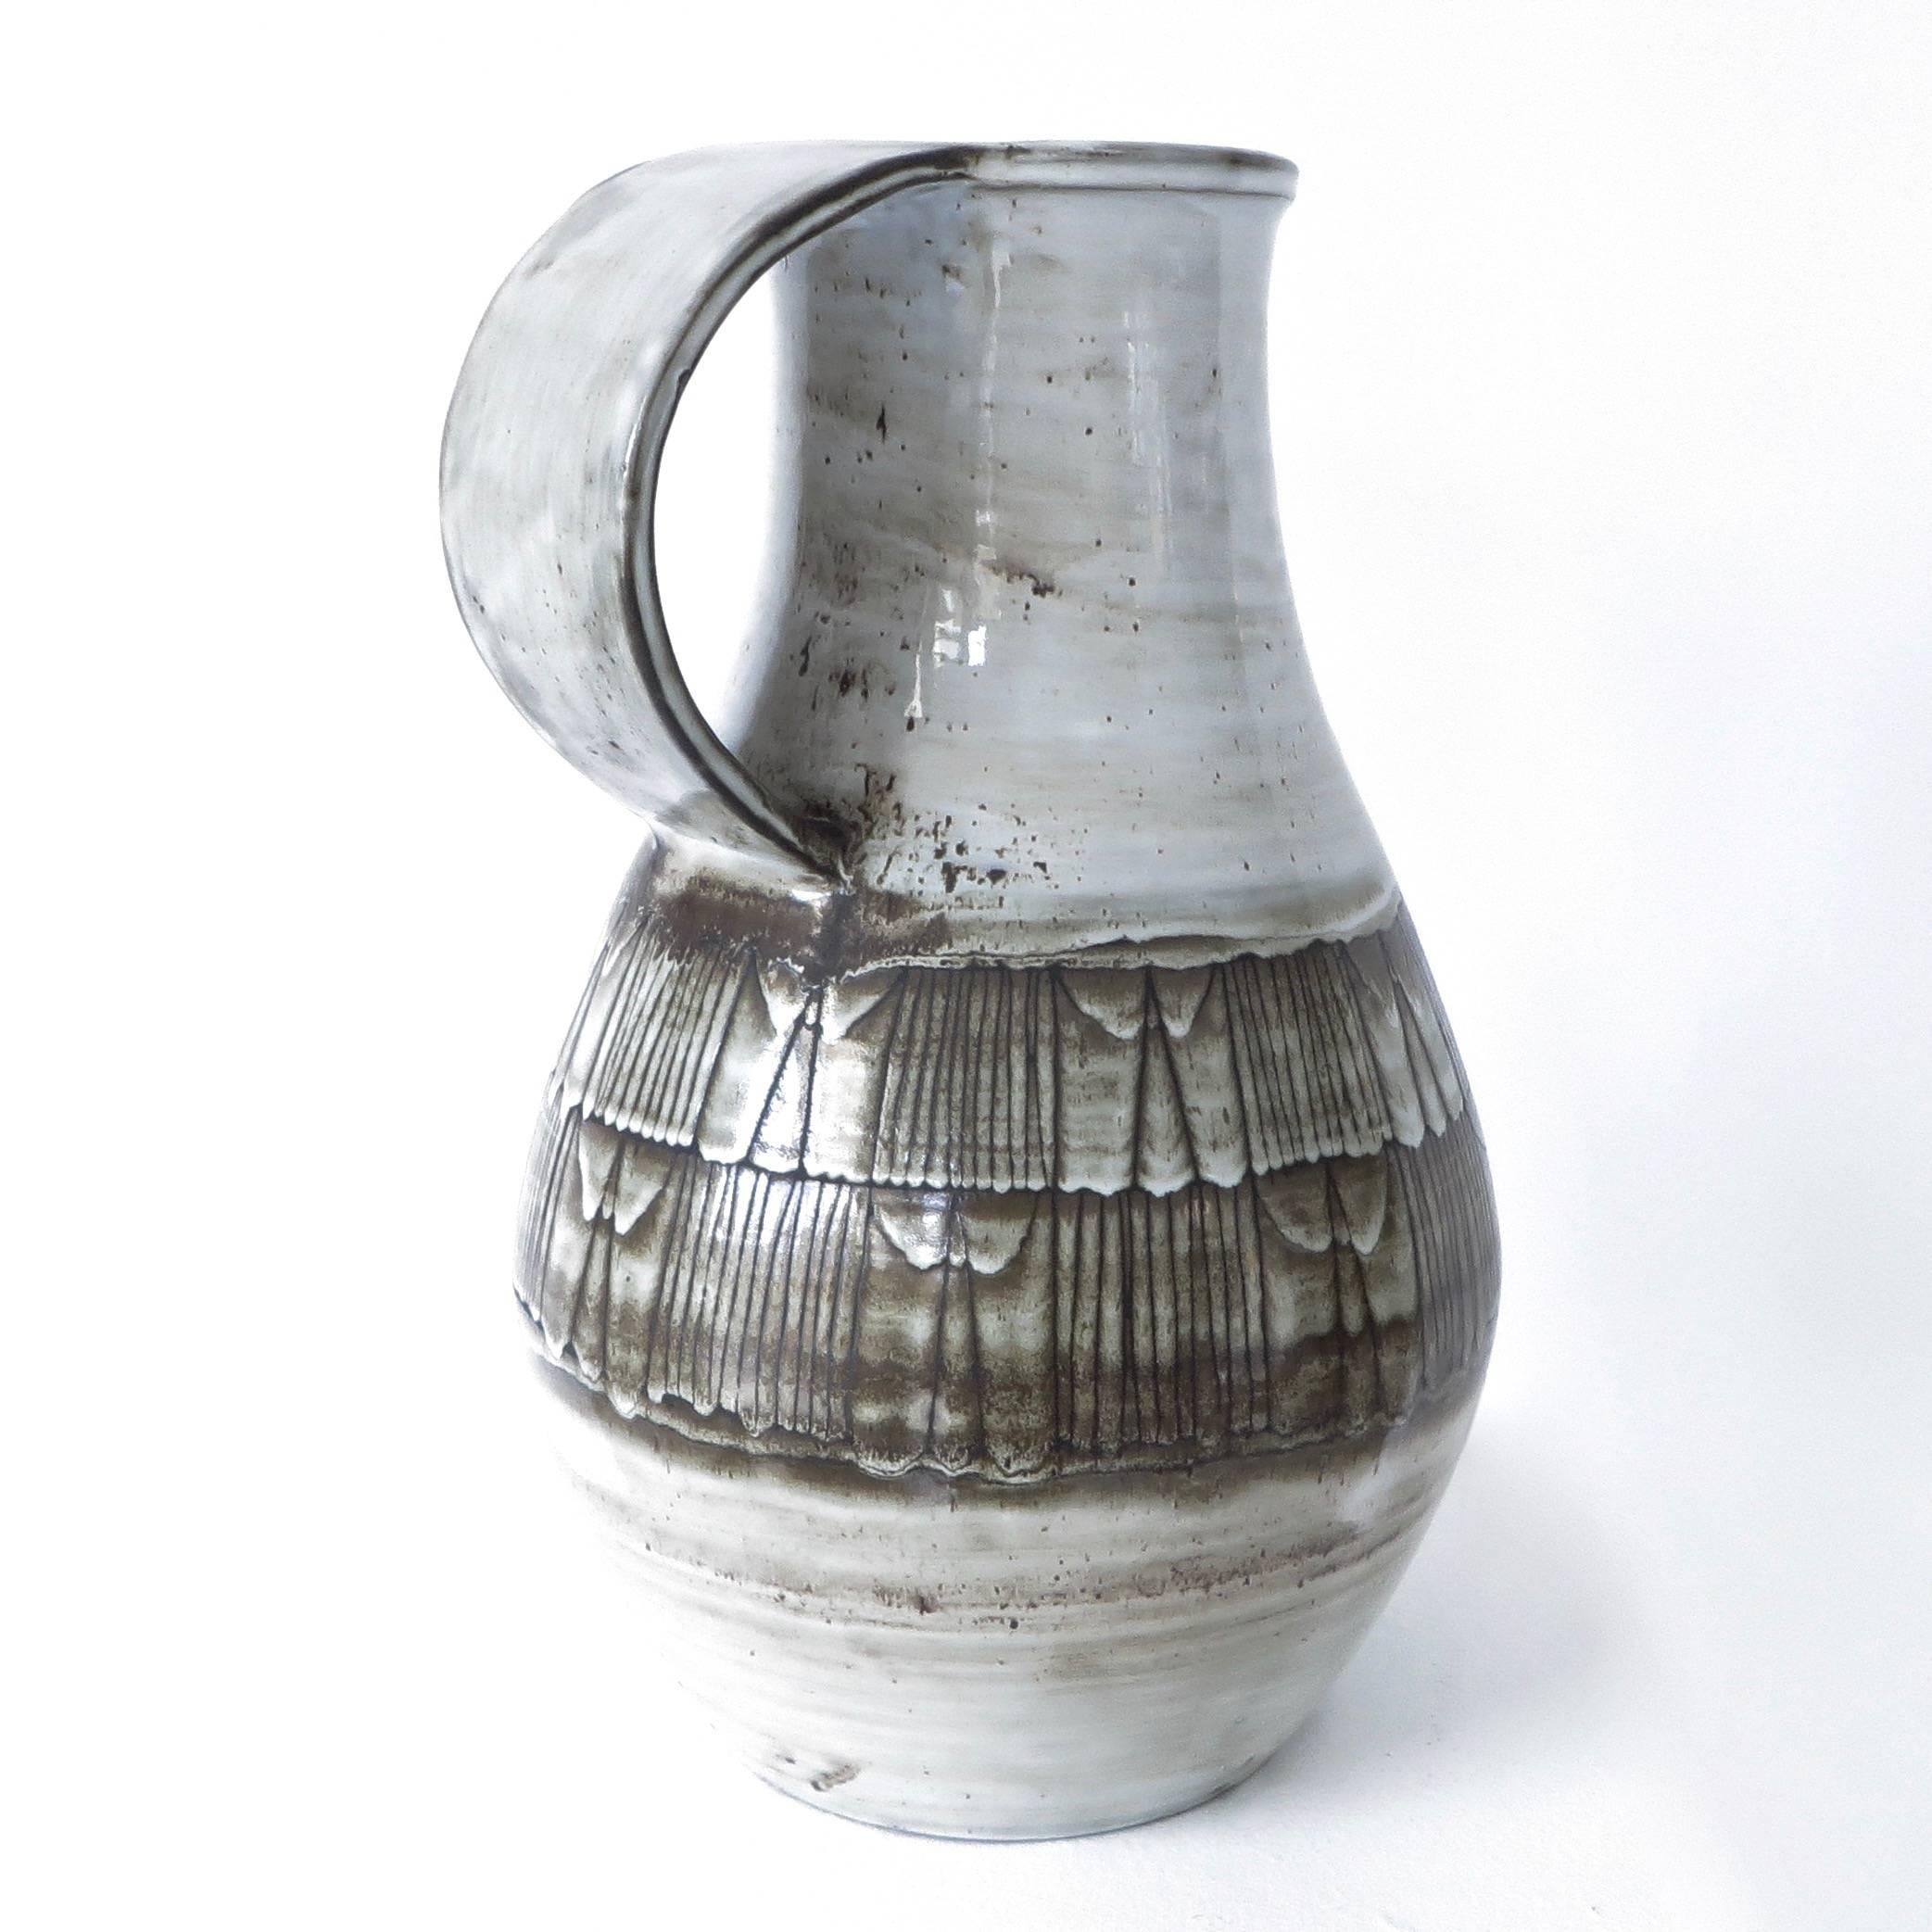 French ceramic monumental pitcher vessel by Jacques Pouchain Atelier Dieulefit in cream glaze and with brown geometric decoration.
Signed.
Excellent condition with no chips or cracks or restorations.
Born in 1925 Jacques Pouchain left Paris and